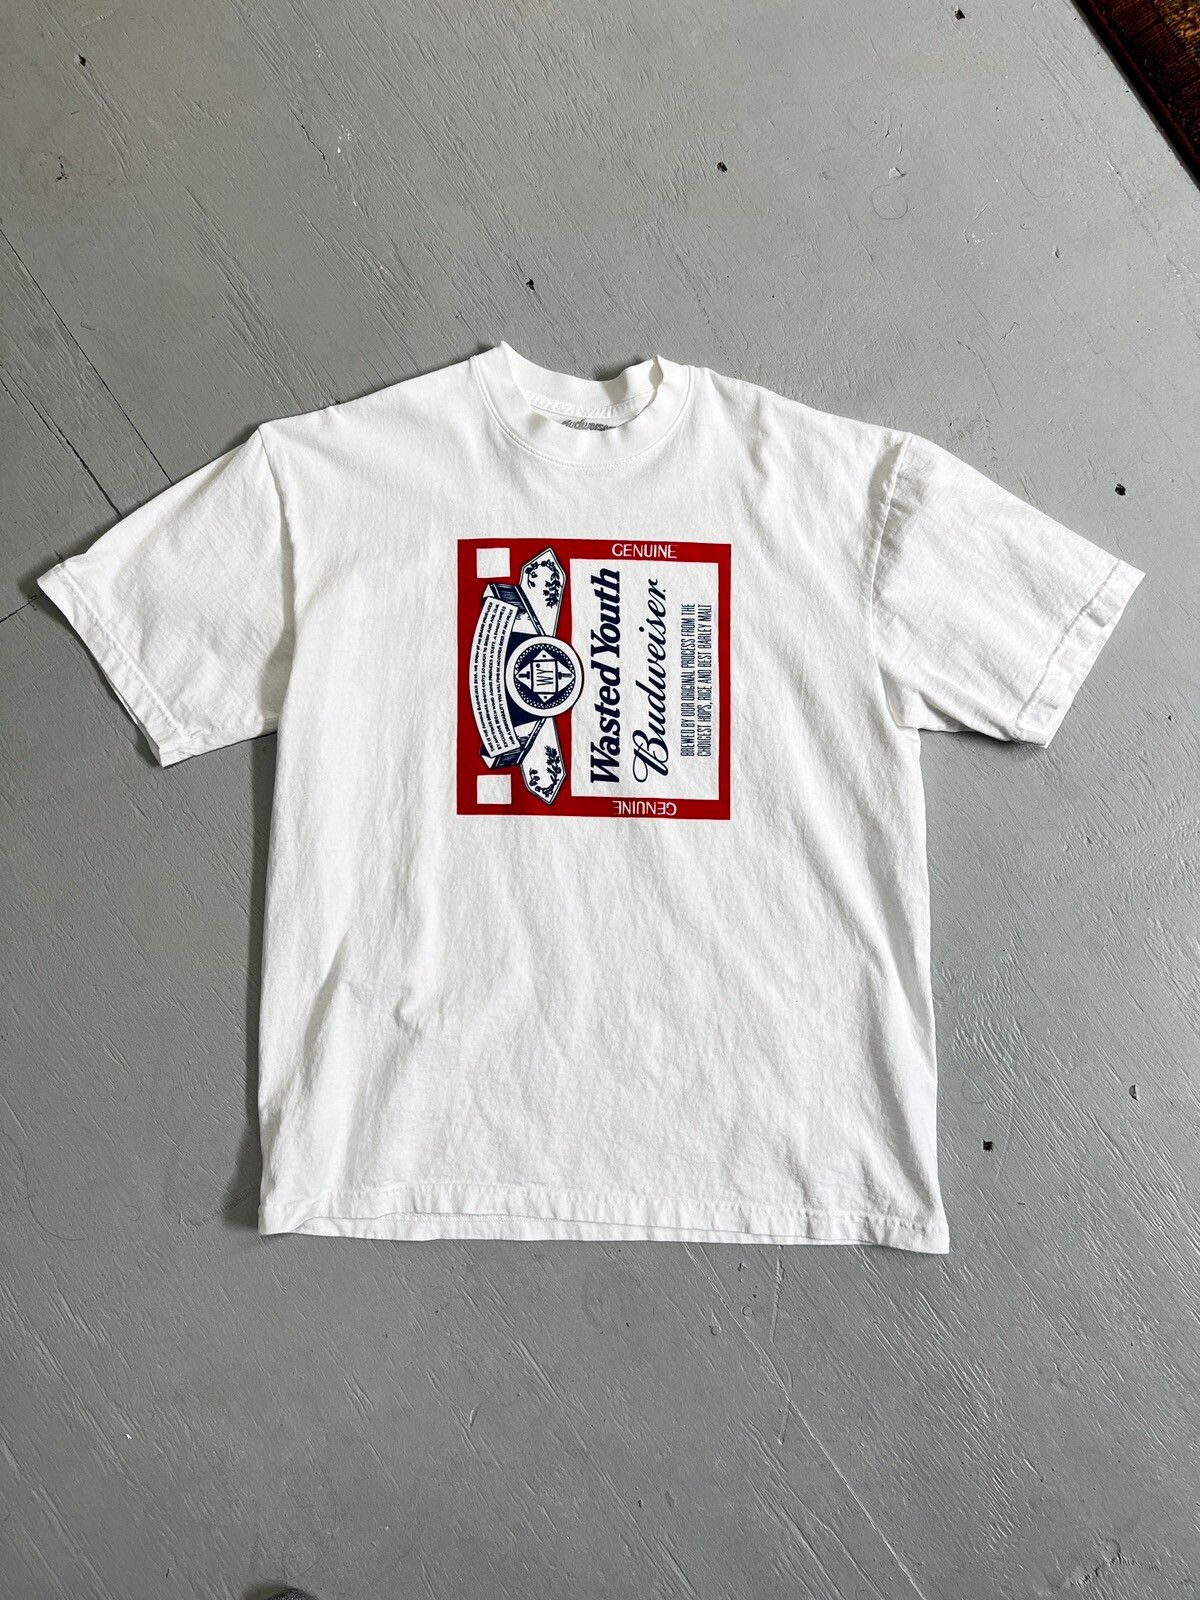 Budweiser Budweiser x Wasted Youth Tee | Grailed